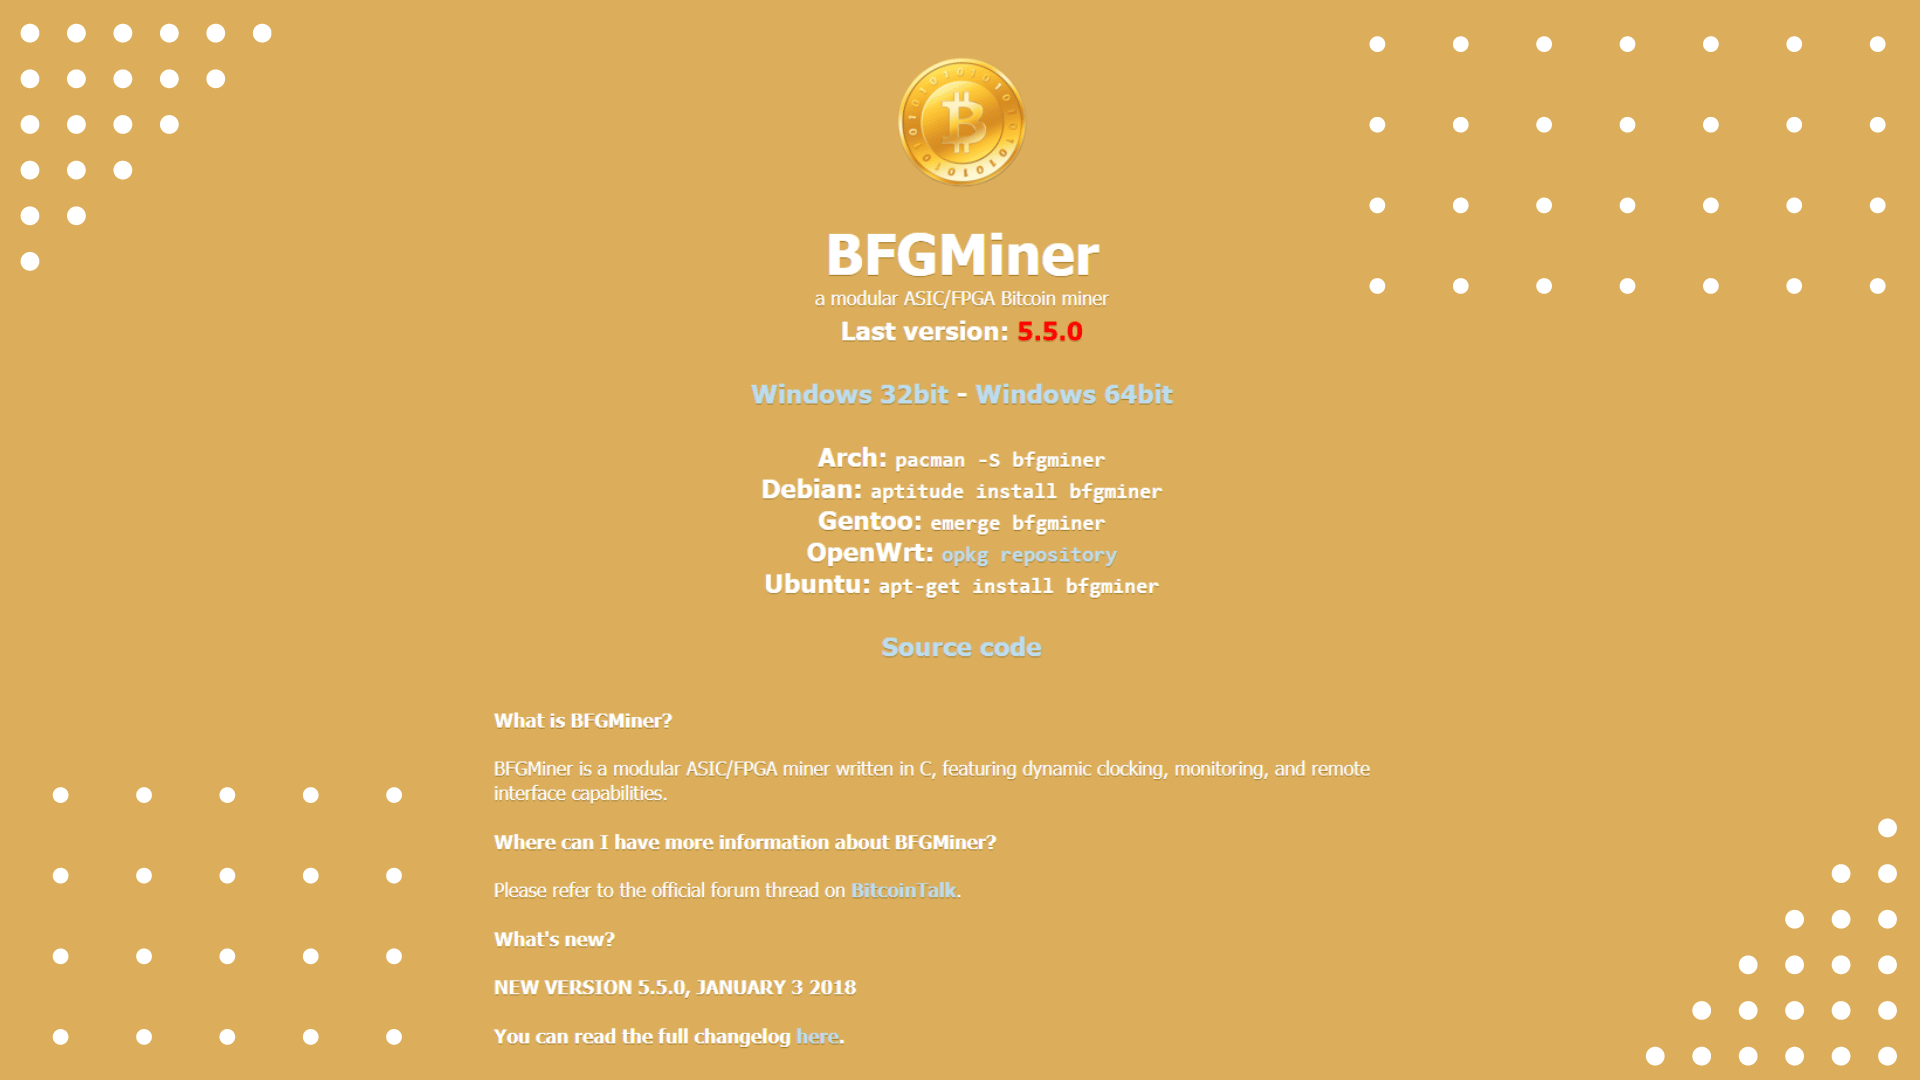 BFGMiner Features